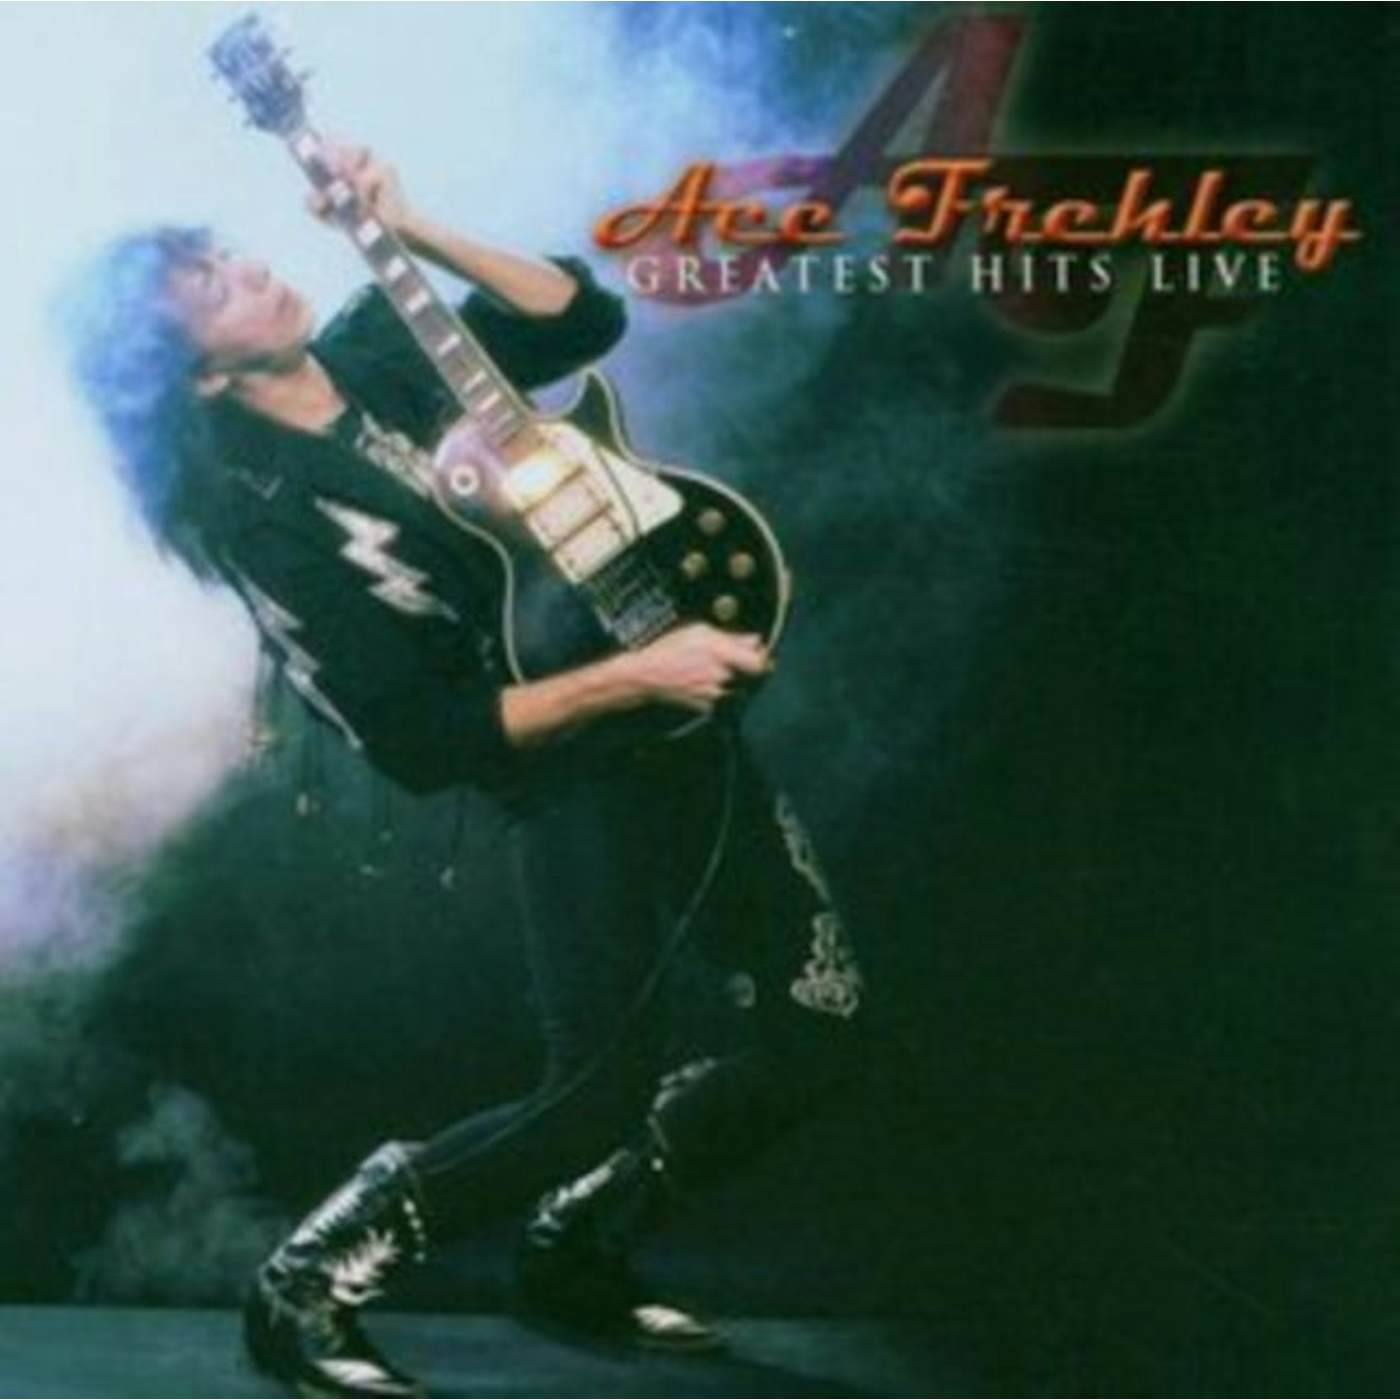 Ace Frehley LP Vinyl Record - Greatest Hits Live